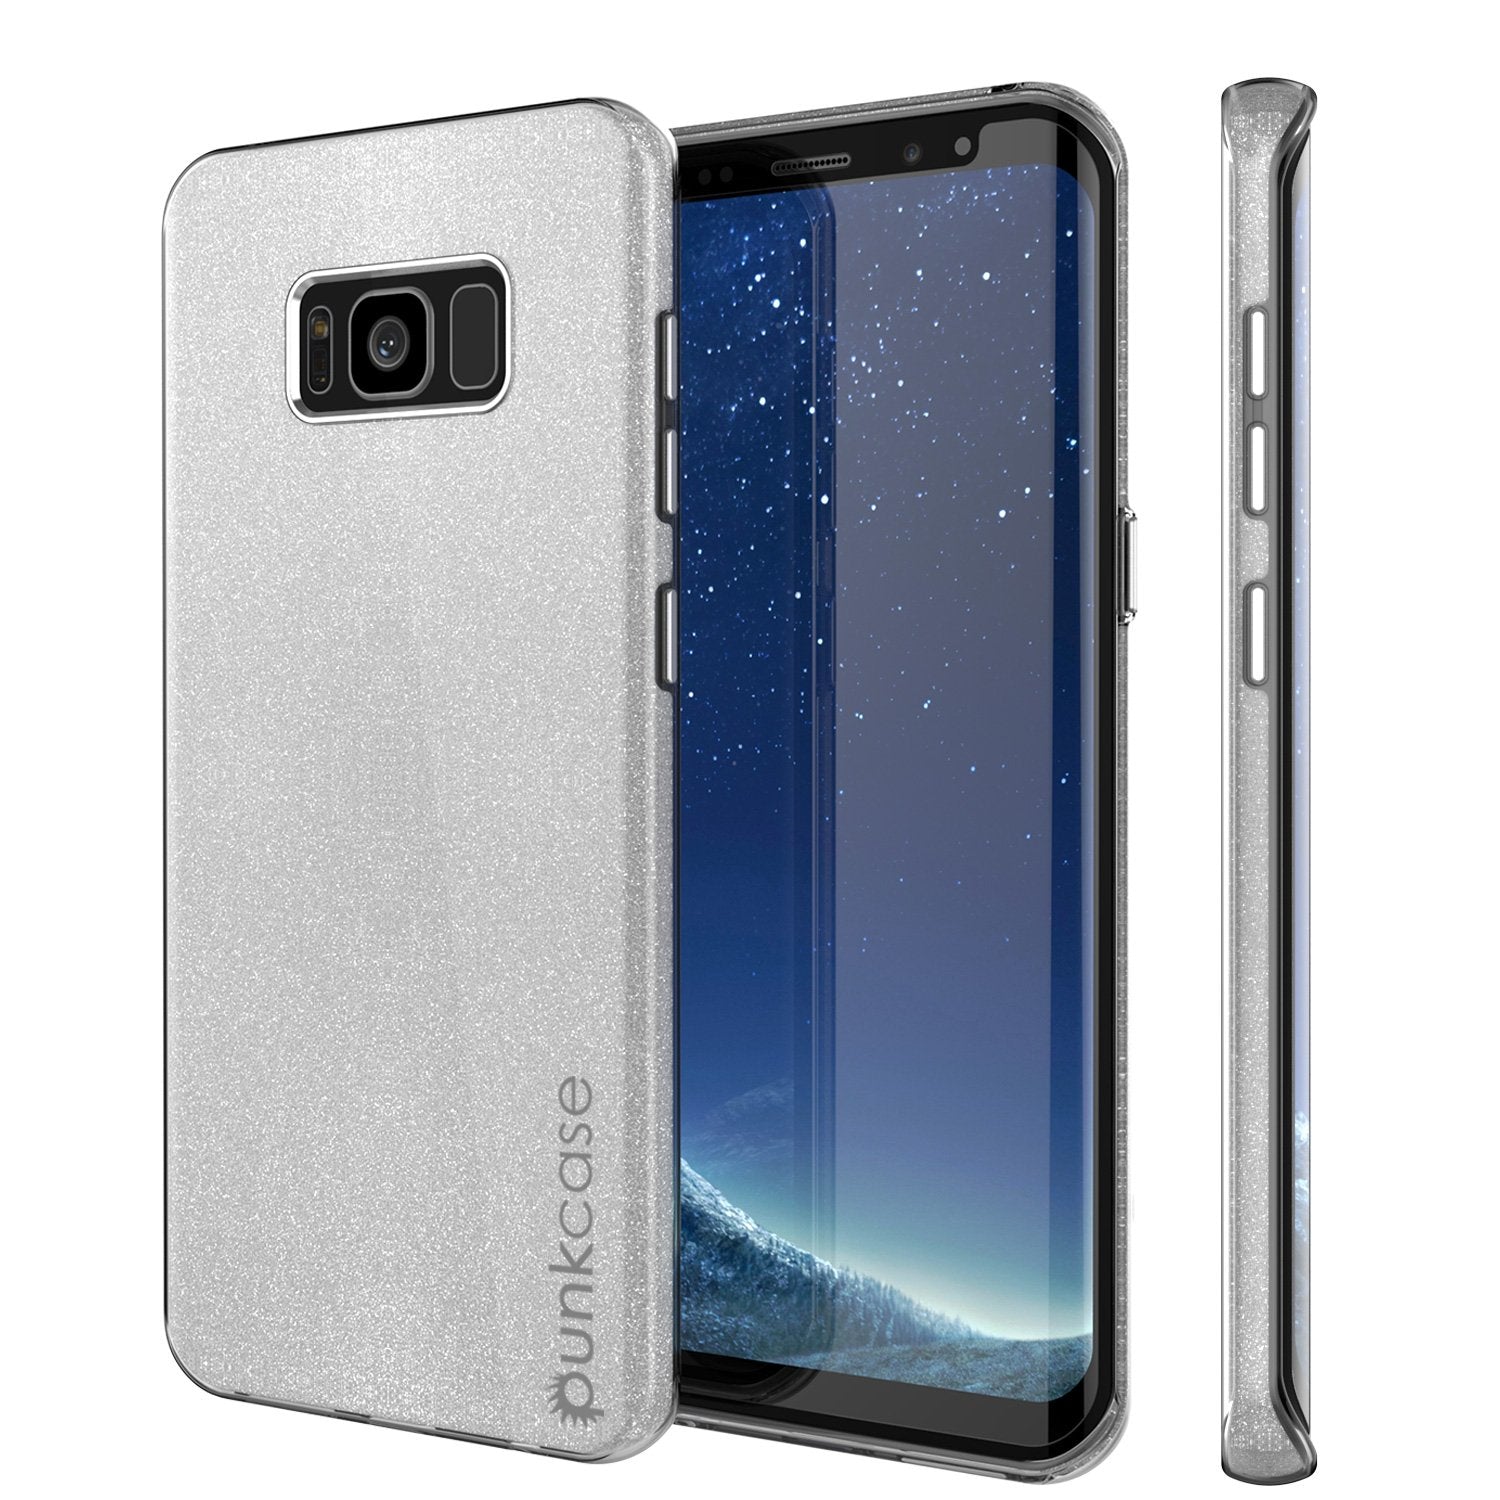 Galaxy S8 Case, Punkcase Galactic 2.0 Series Ultra Slim Protective Armor TPU Cover w/ PunkShield Screen Protector [Silver]